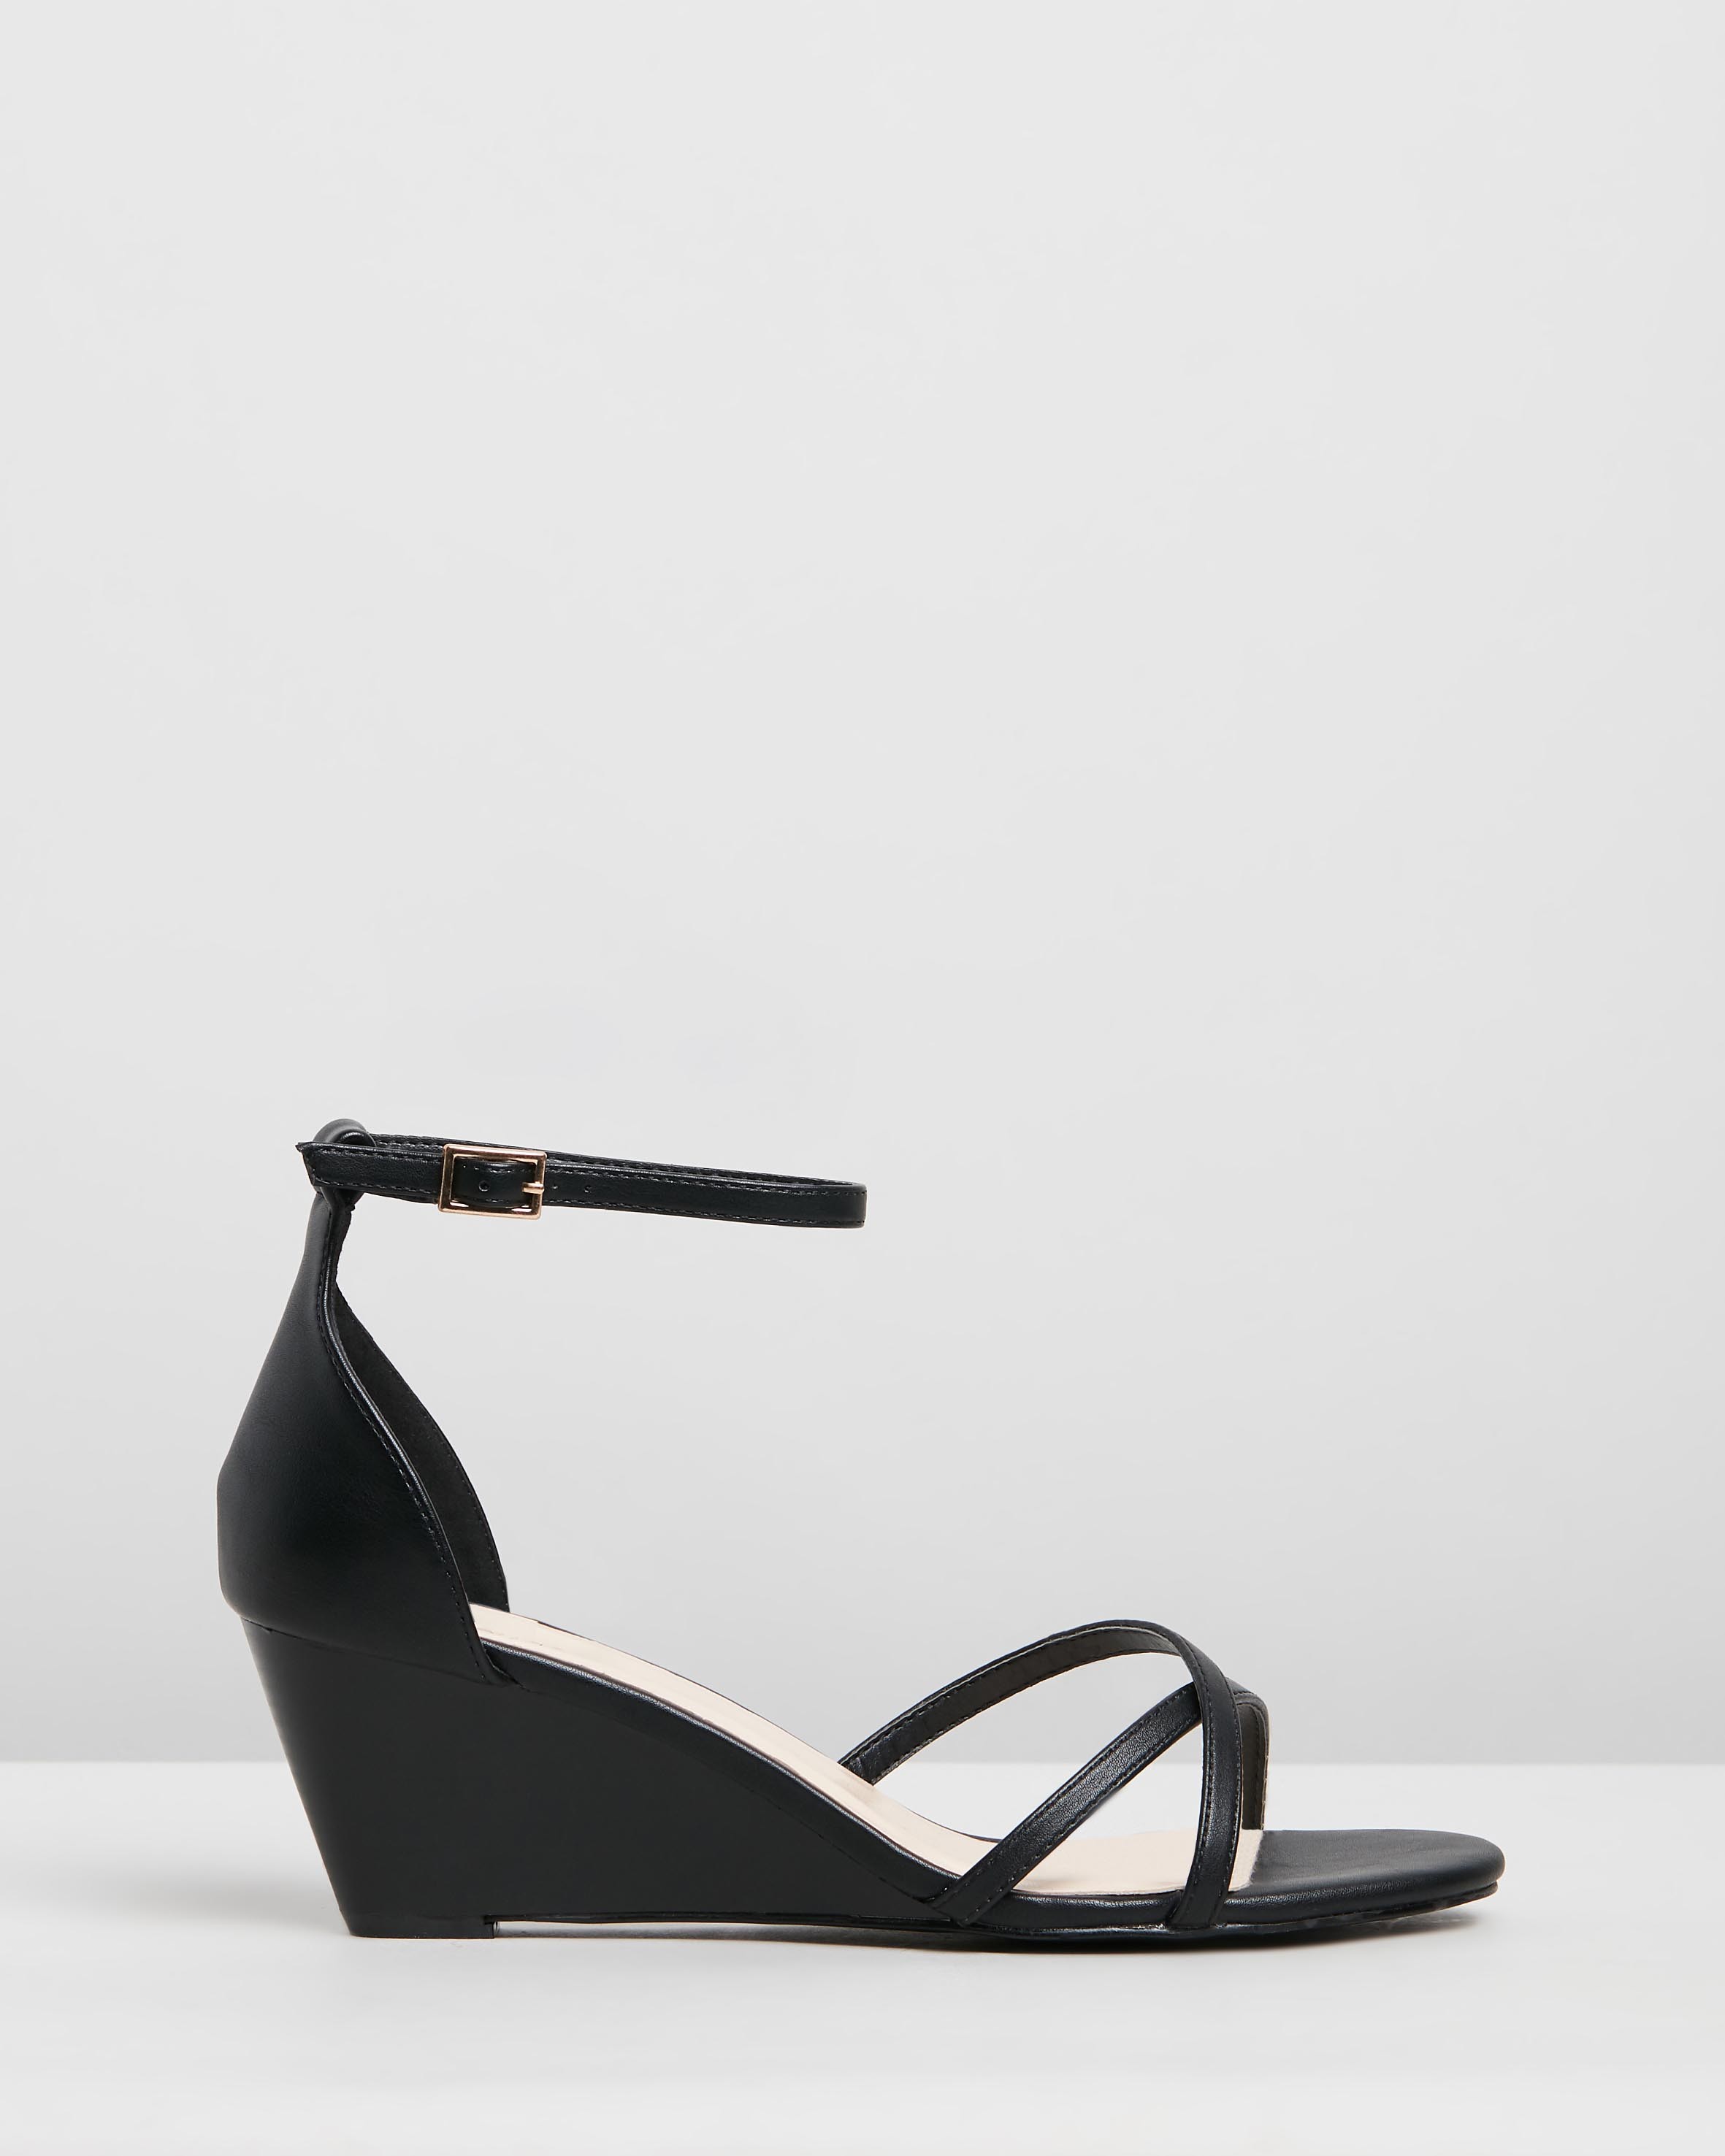 Niles Wedges Black Smooth by Spurr | ShoeSales